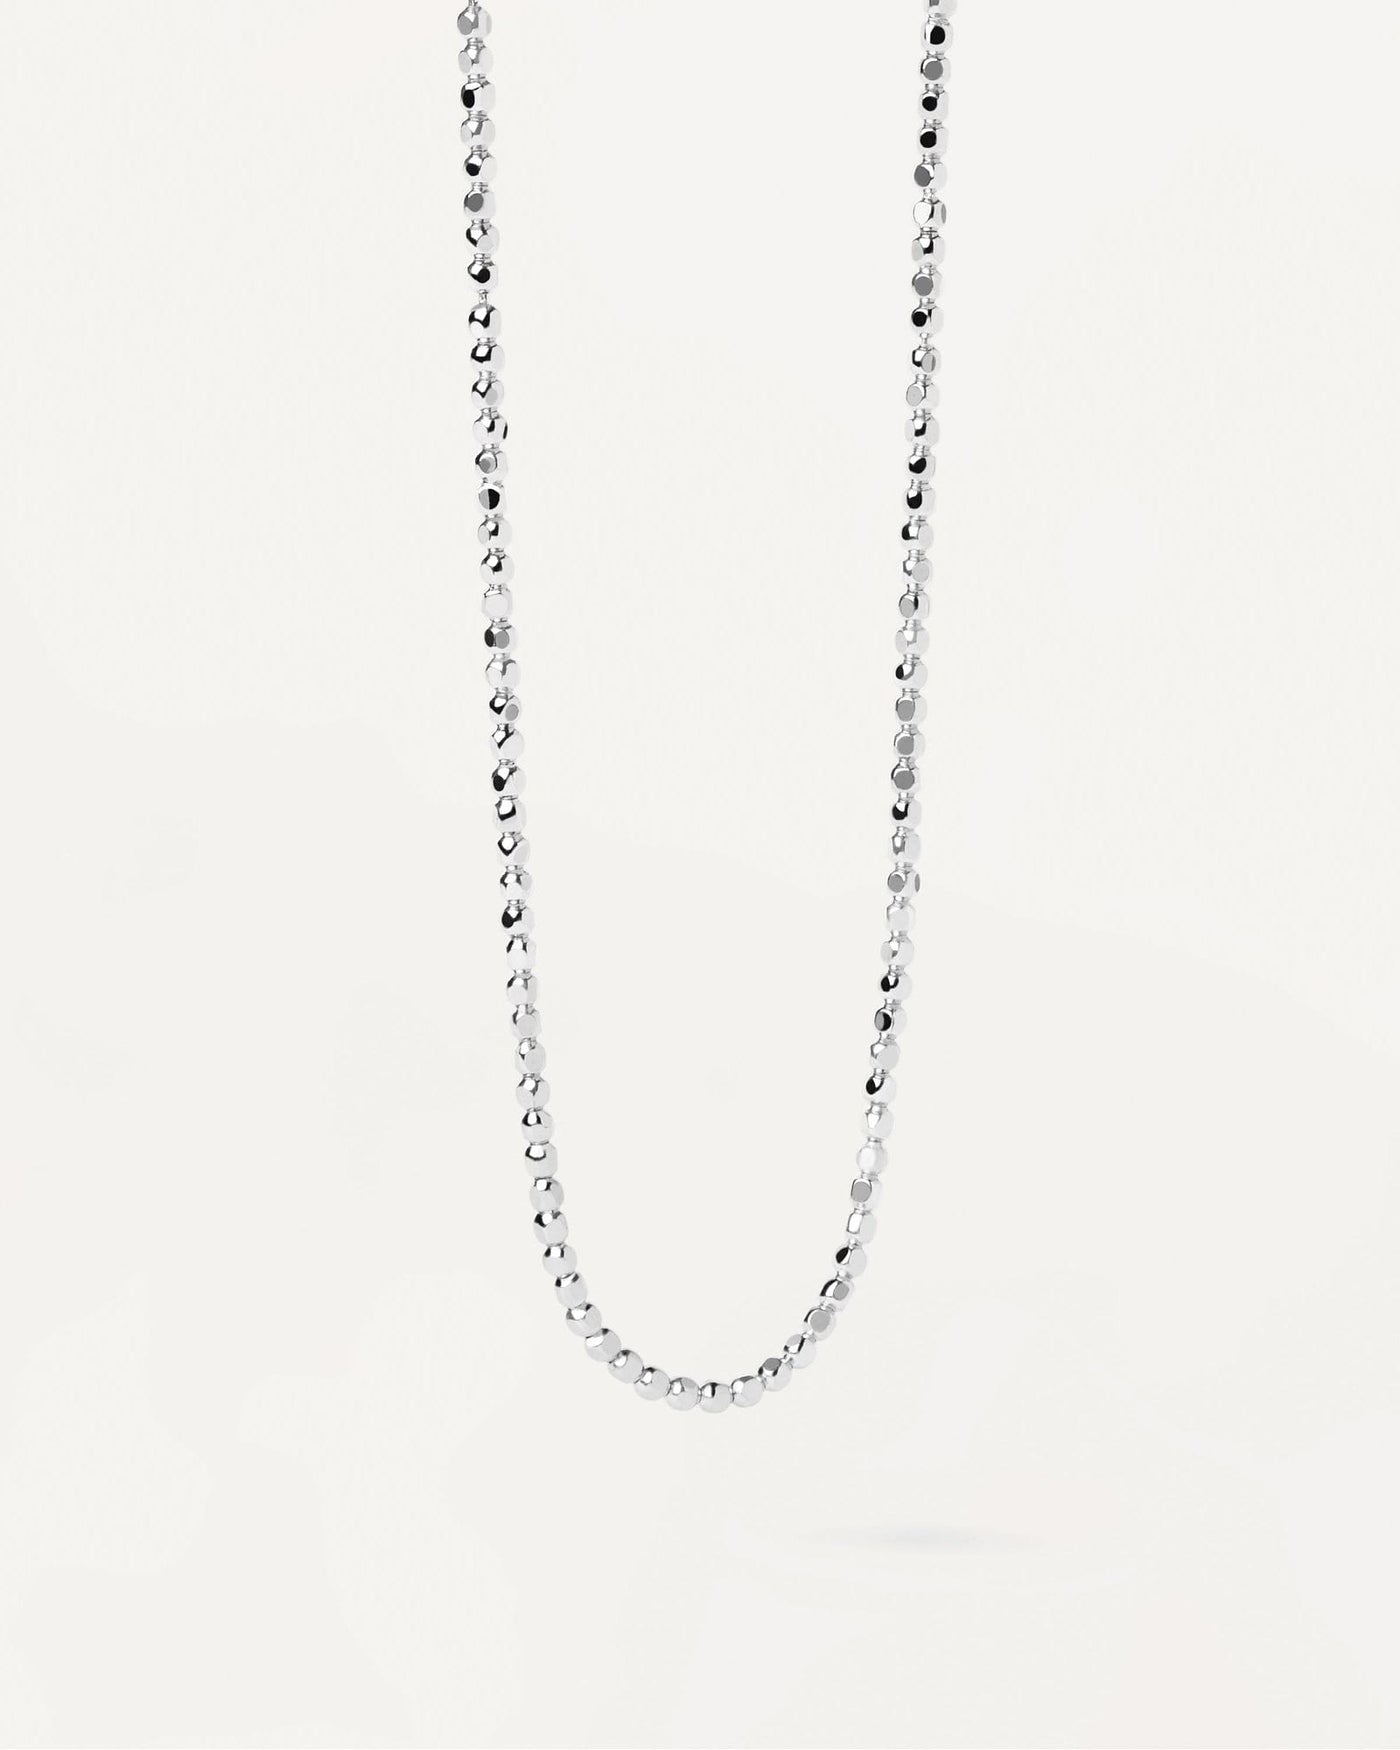 2024 Selection | Marina Silver Chain Necklace. Sterling silver necklace with asymetric bead links. Get the latest arrival from PDPAOLA. Place your order safely and get this Best Seller. Free Shipping.